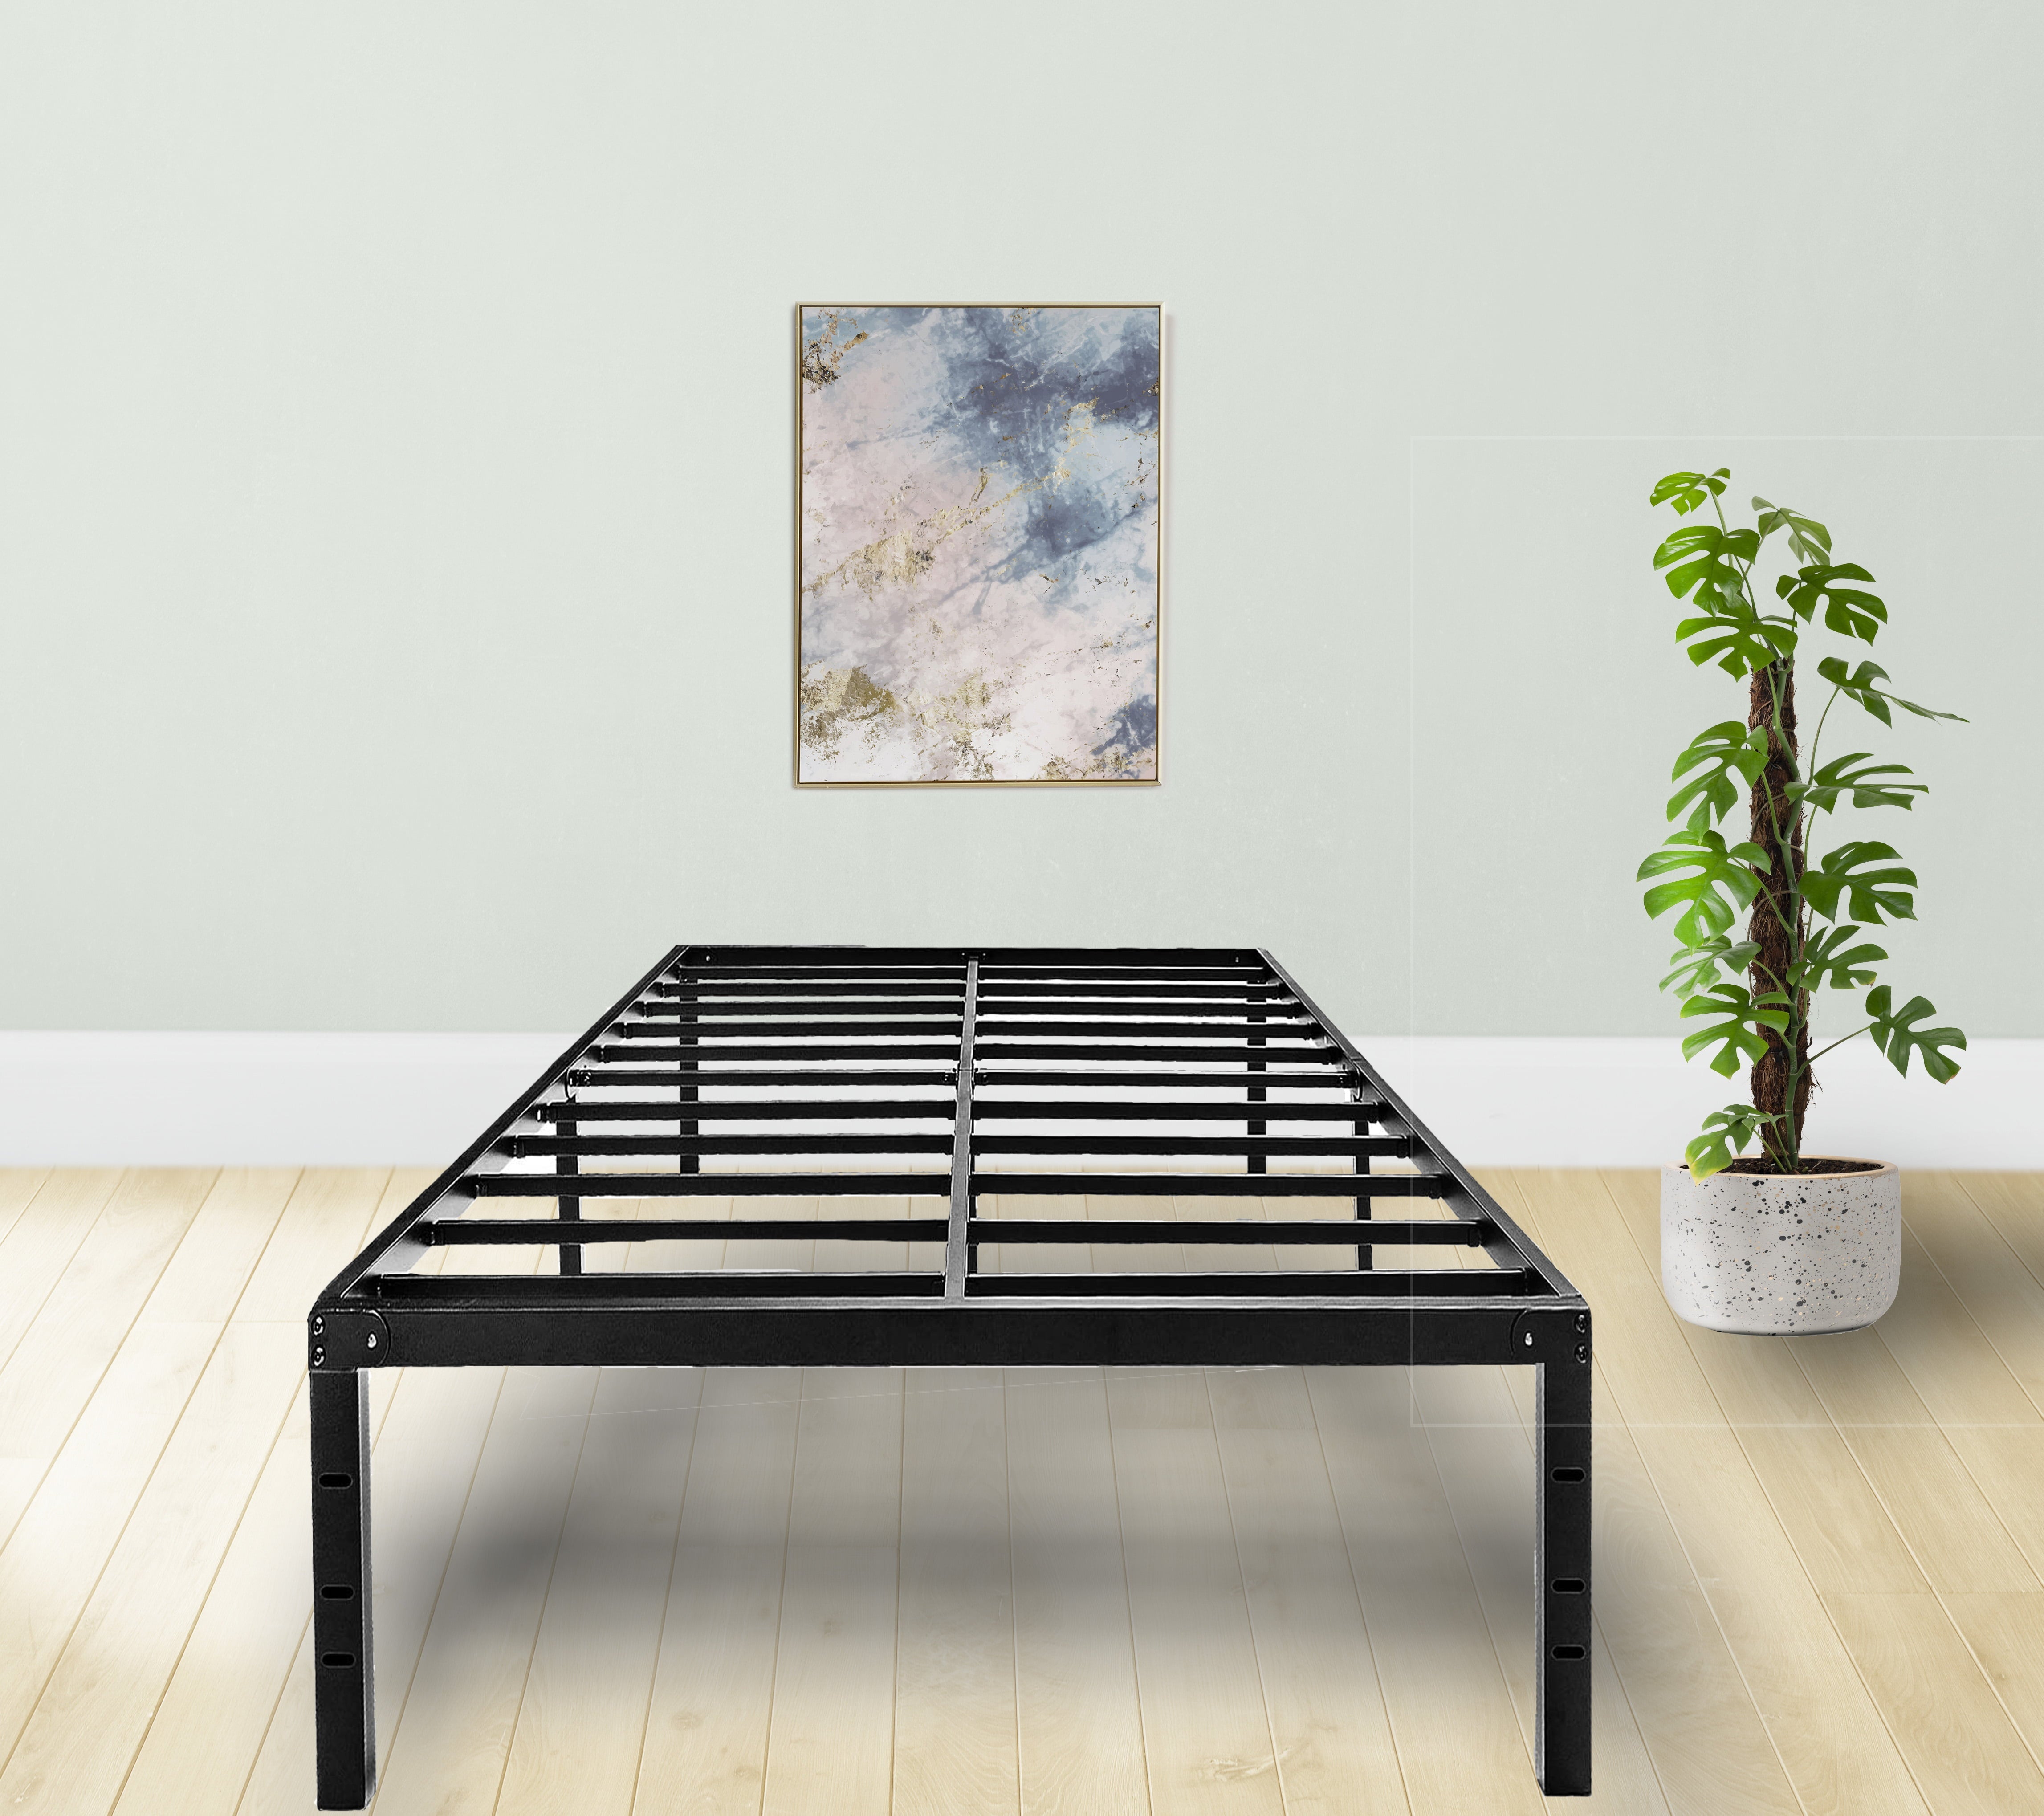 FOYUEE Queen Platform Bed Frame 18" Tall, Bedframe No Box Spring Needed with Storage Metal Black